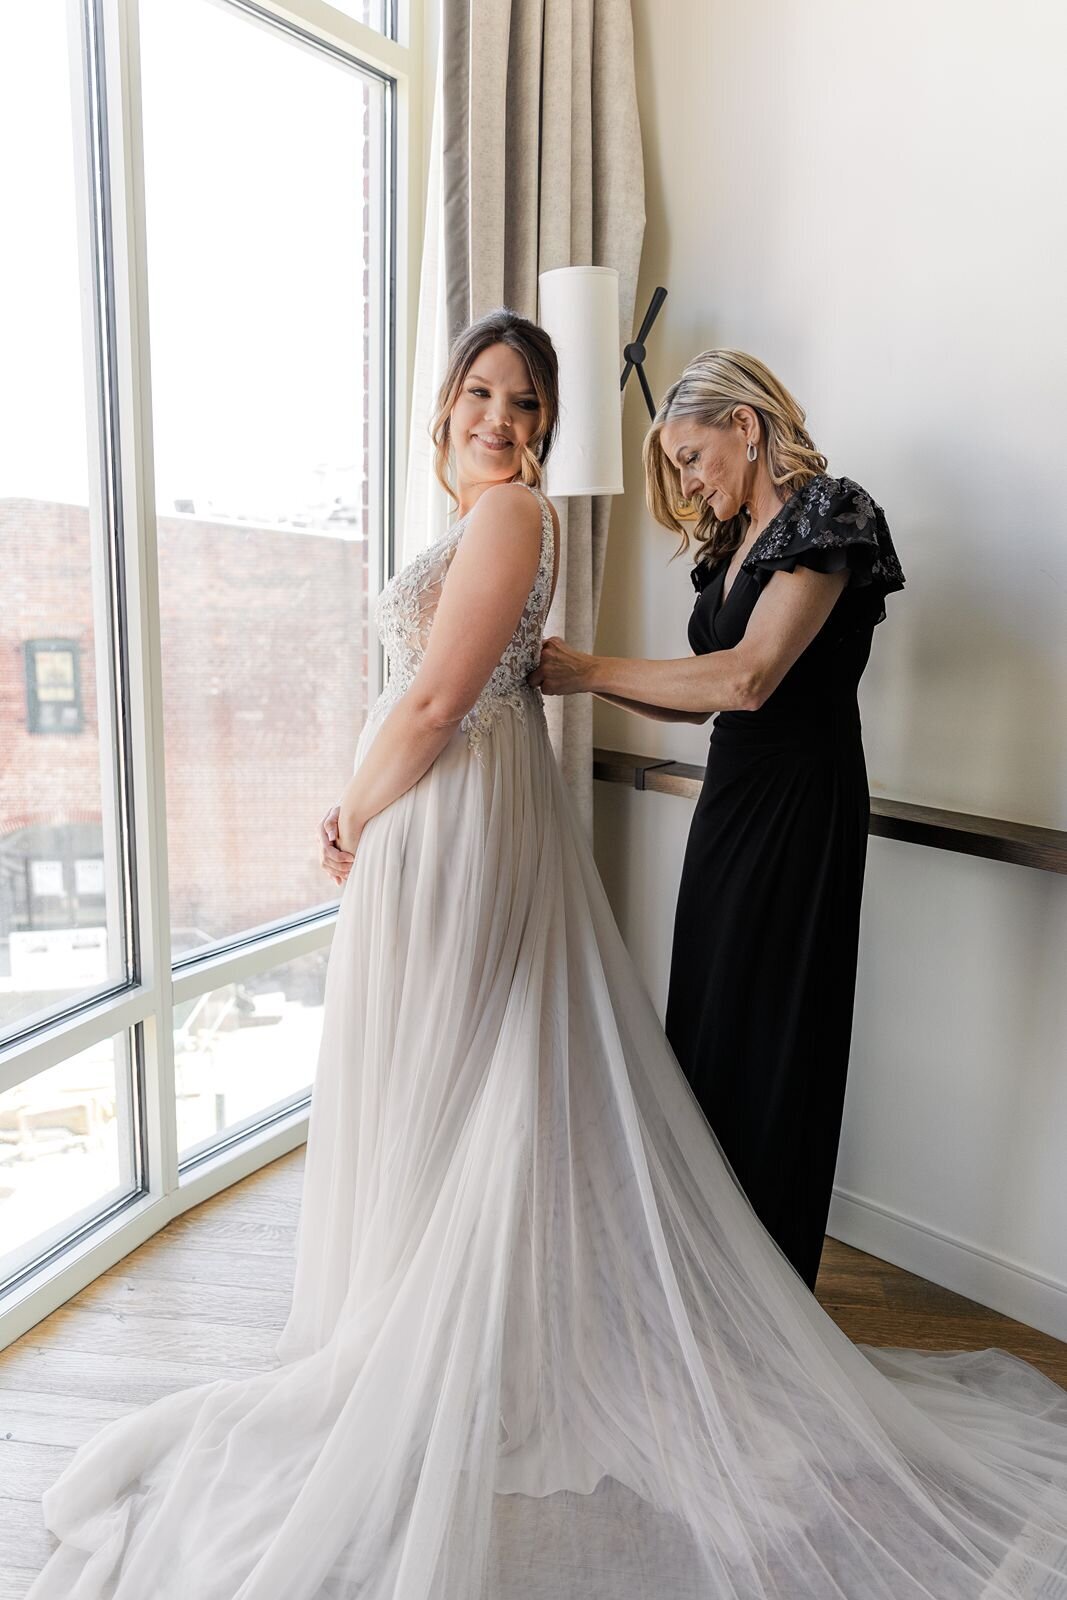 Bride-Mother-Getting-Ready-Wedding-Vic's-On-The-River-Savanah